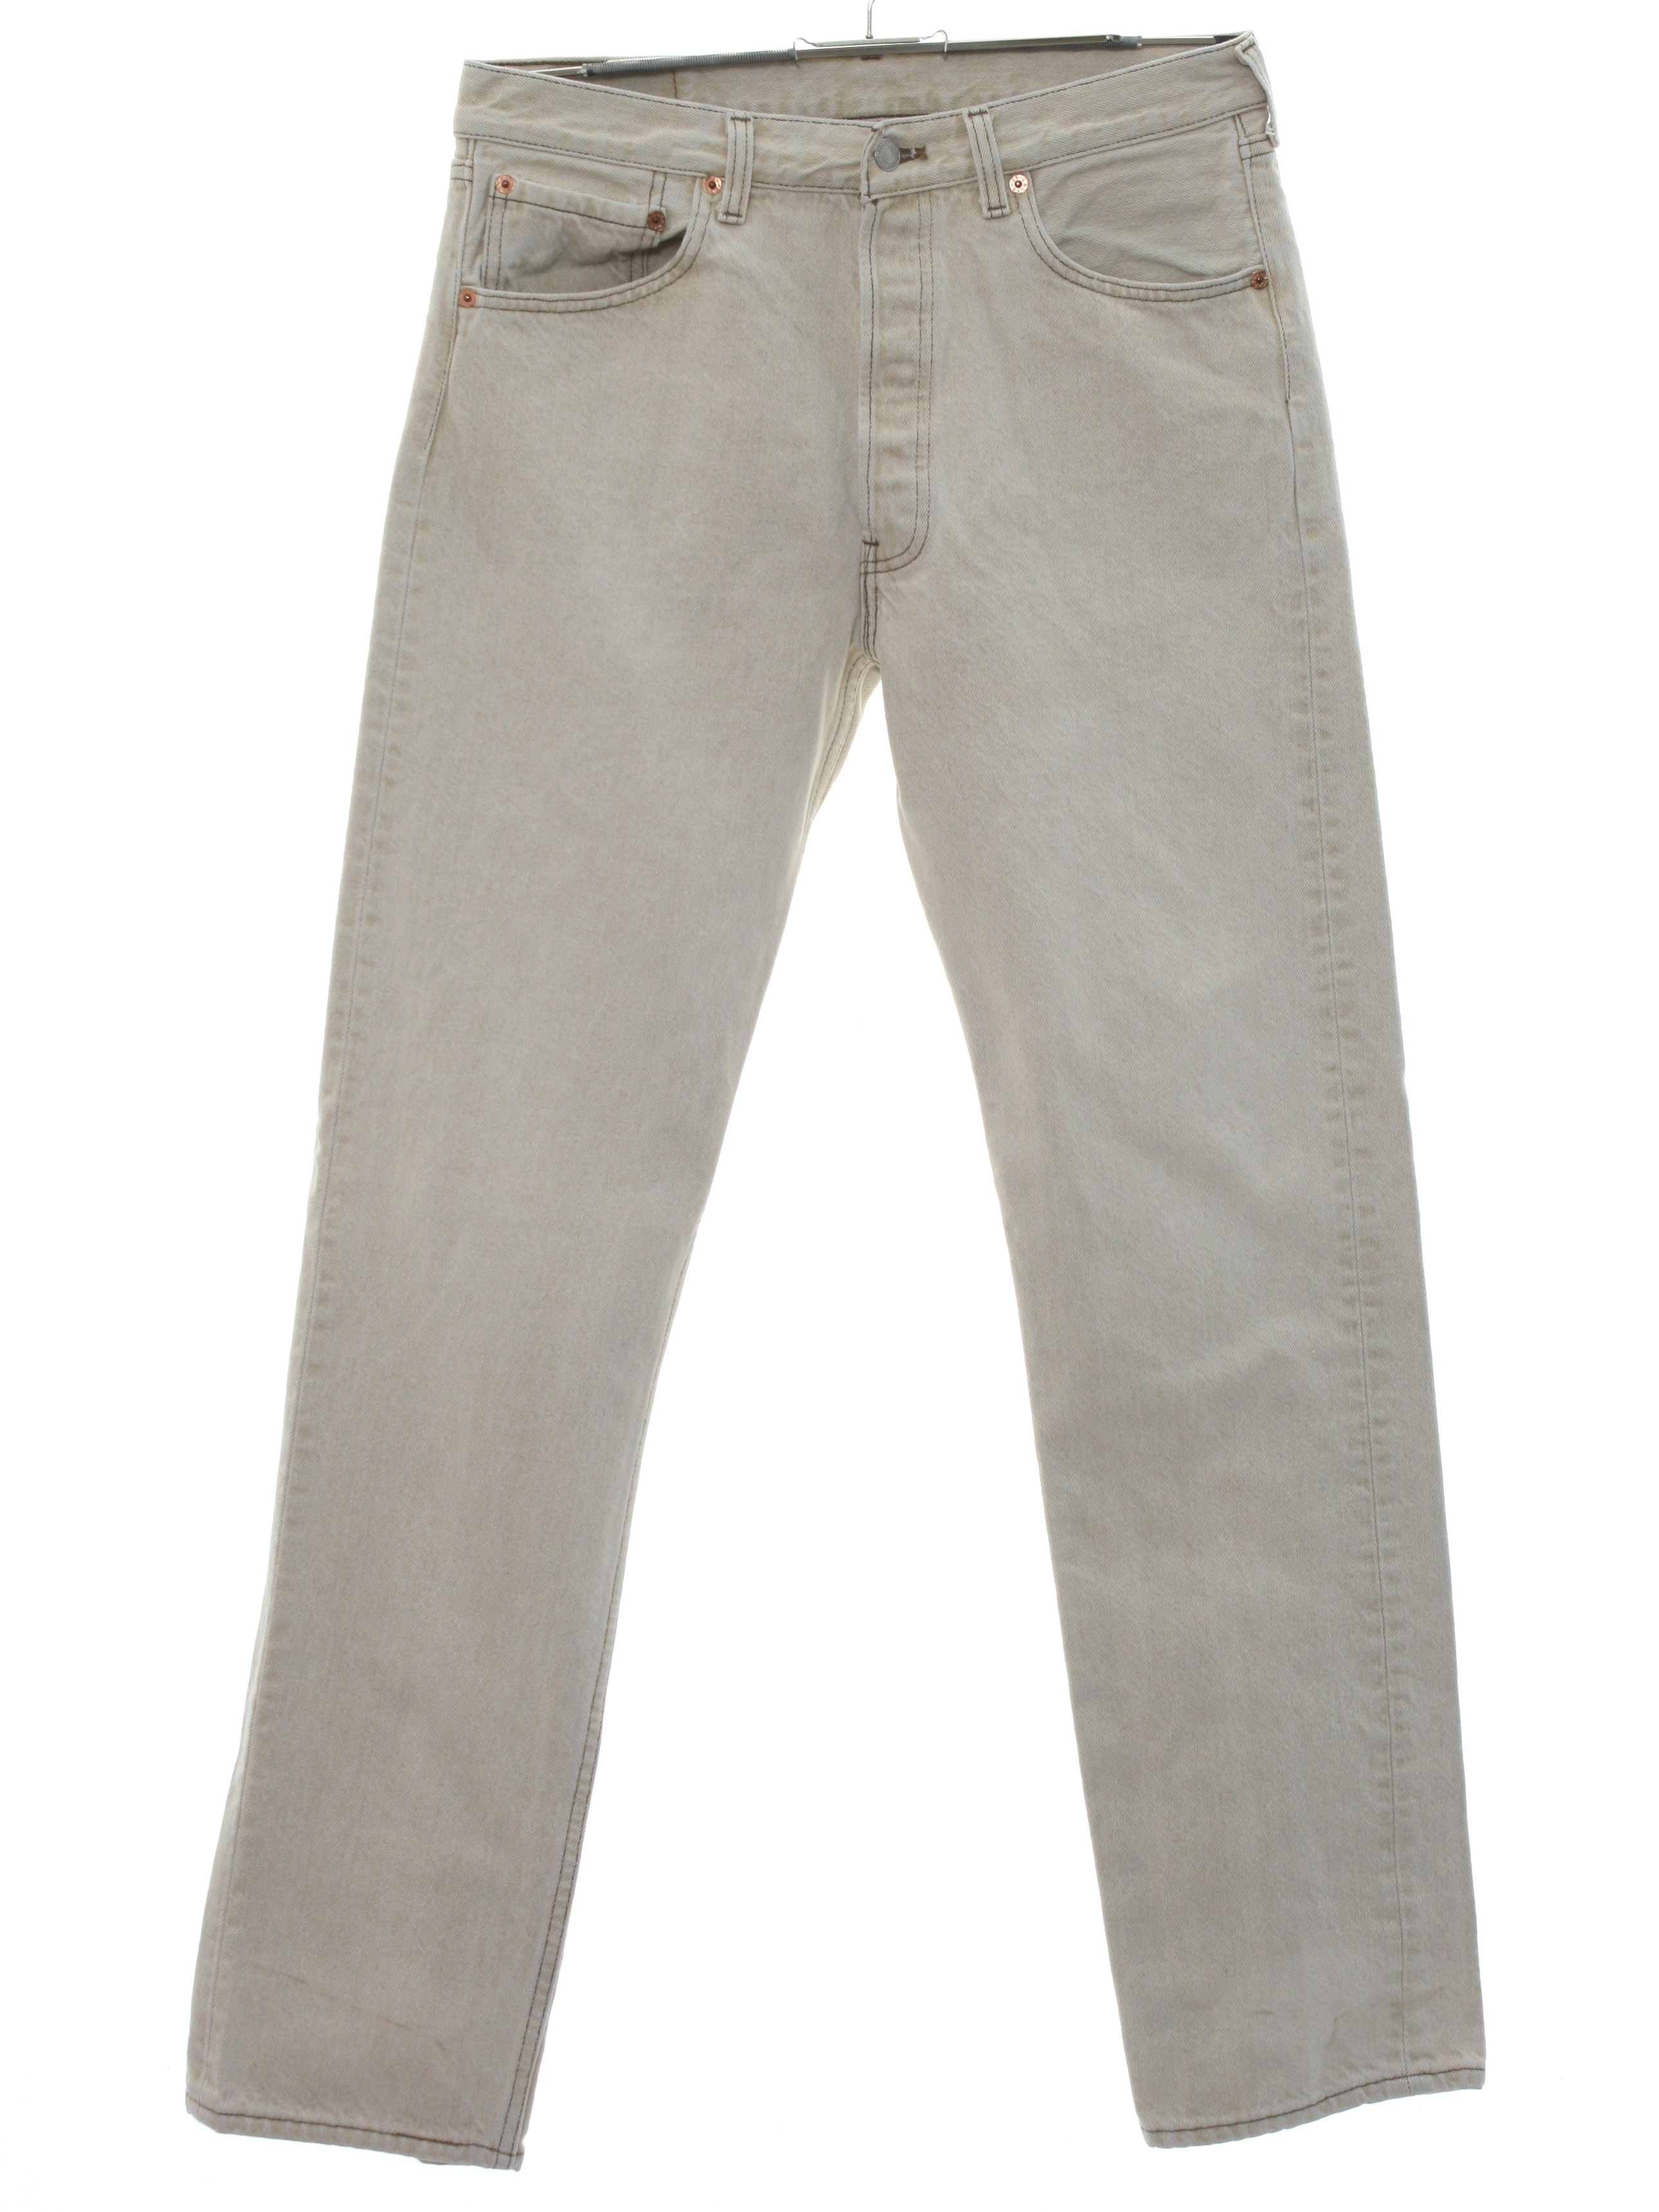 Nineties Vintage Pants: 90s -Levis 501- Mens tan factory over dyed on ...